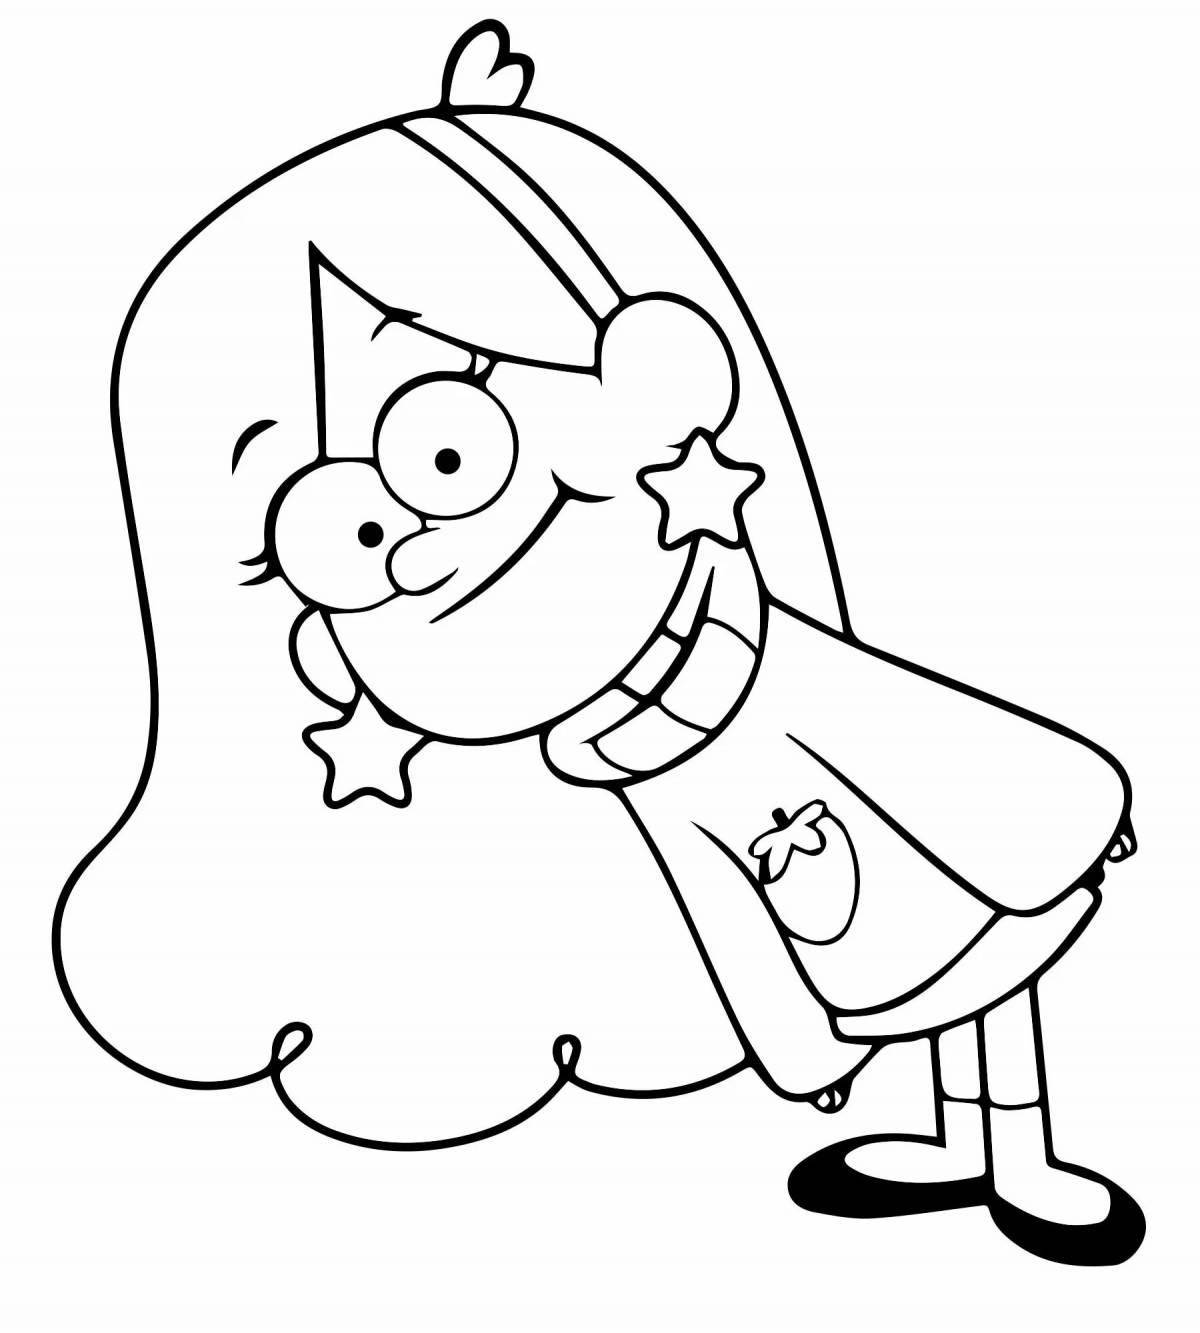 Coloring book shiny mabel